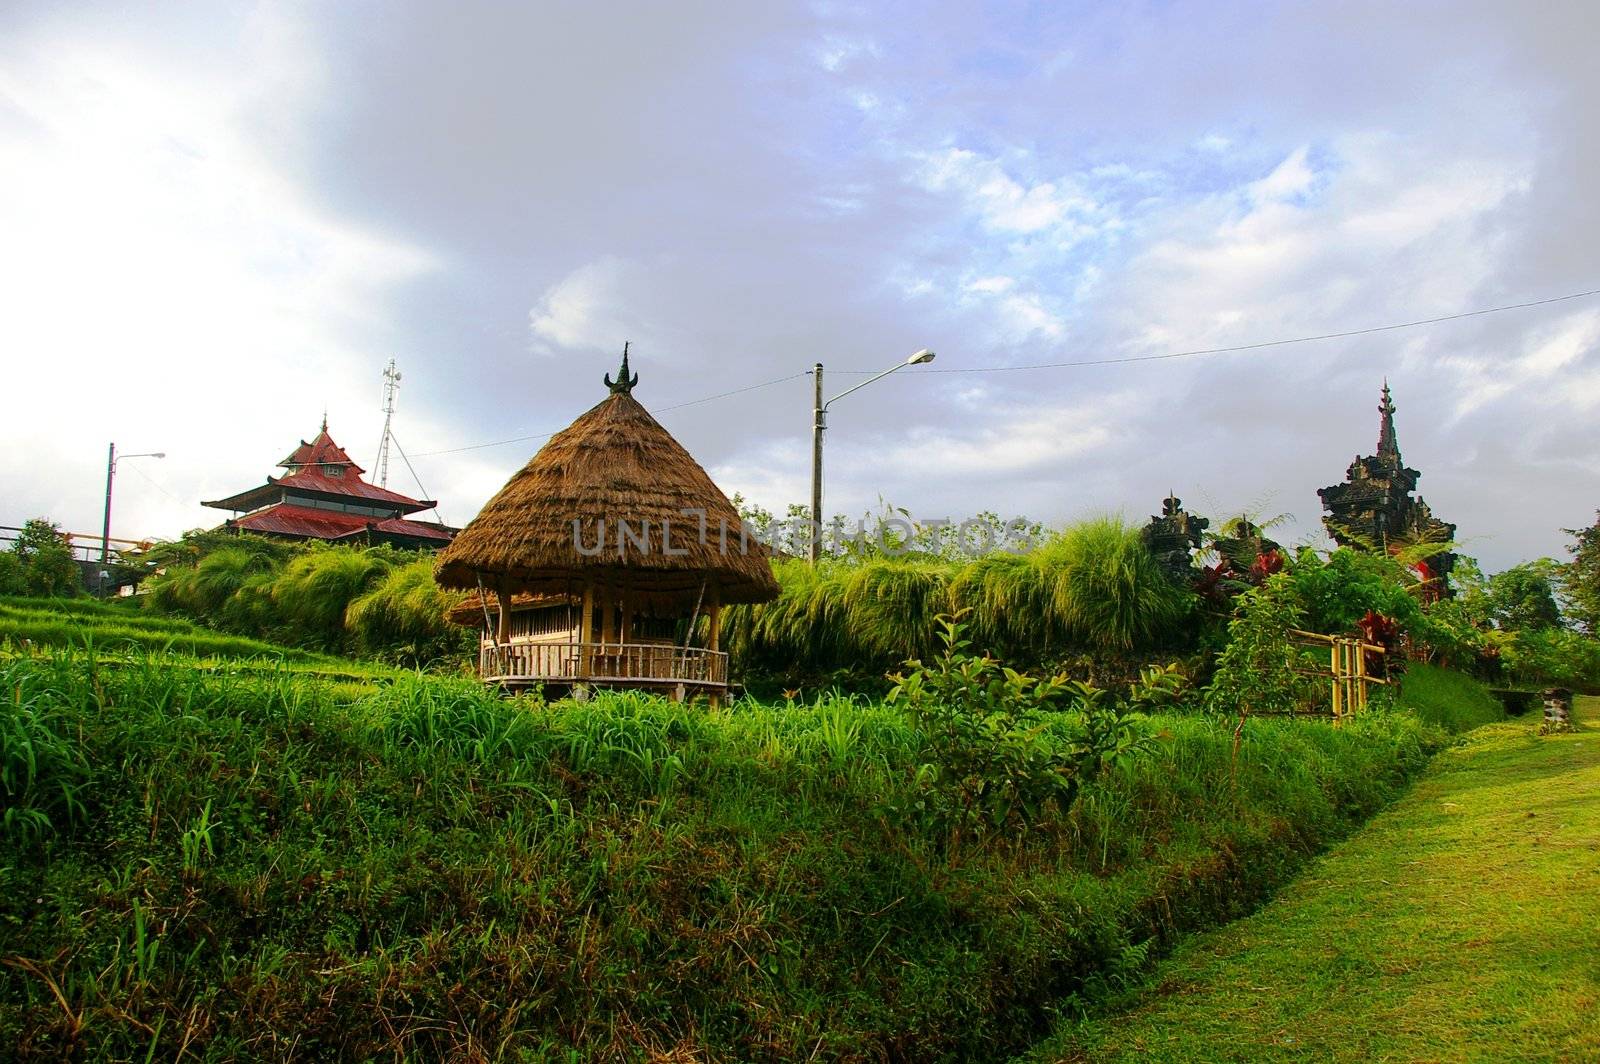 A village in Bali which is part of an Ecotourism network because of it's coffee plantations. Kiadan Pelaga, Bali, Indonesia.